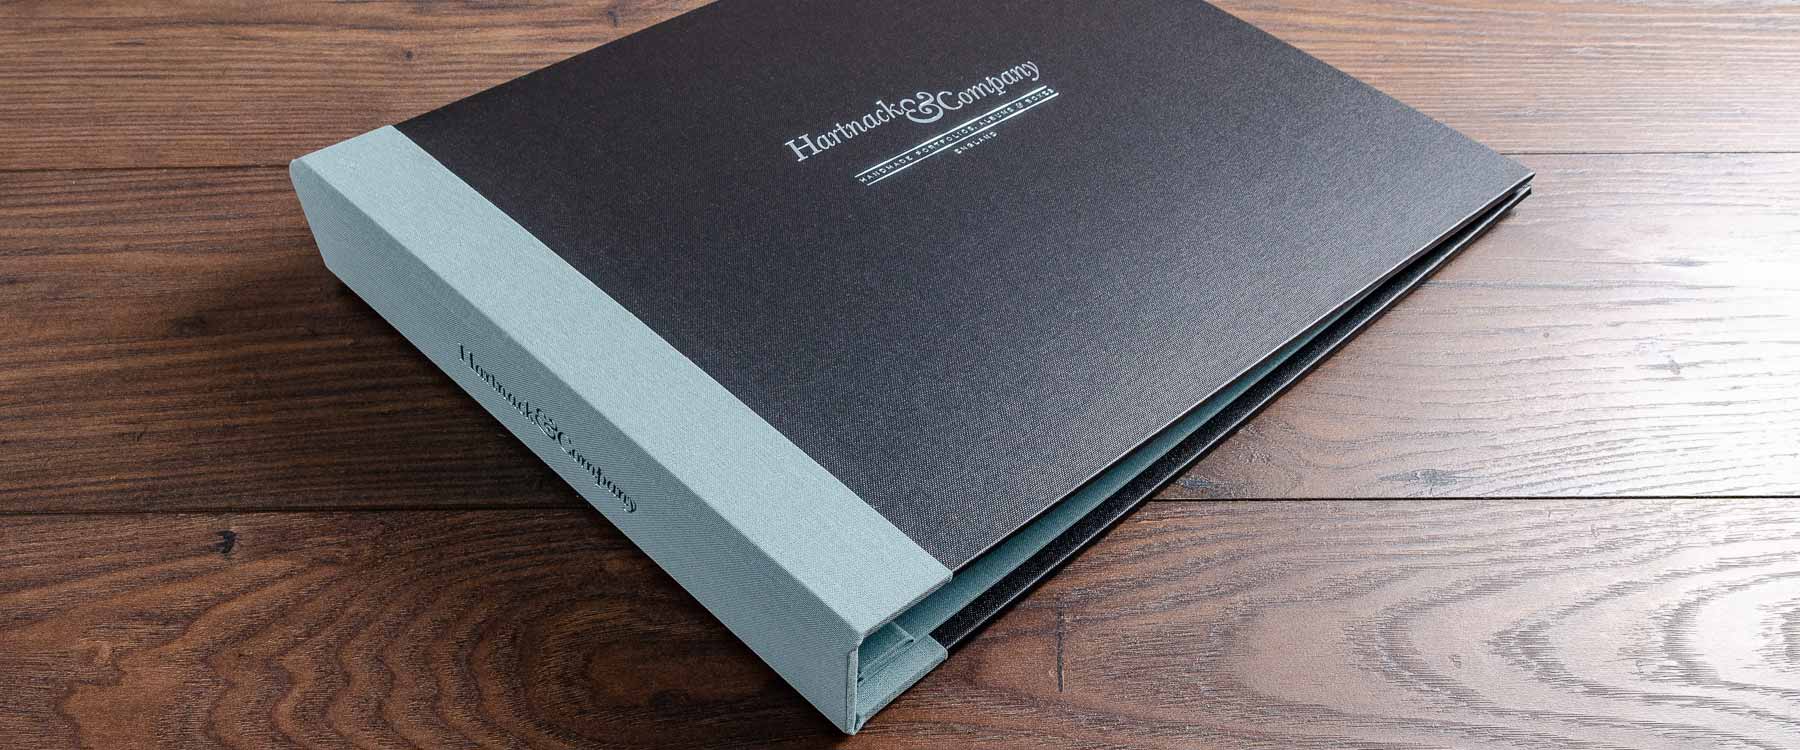 Personalised presentation portfolio in black book cloth with green foiling